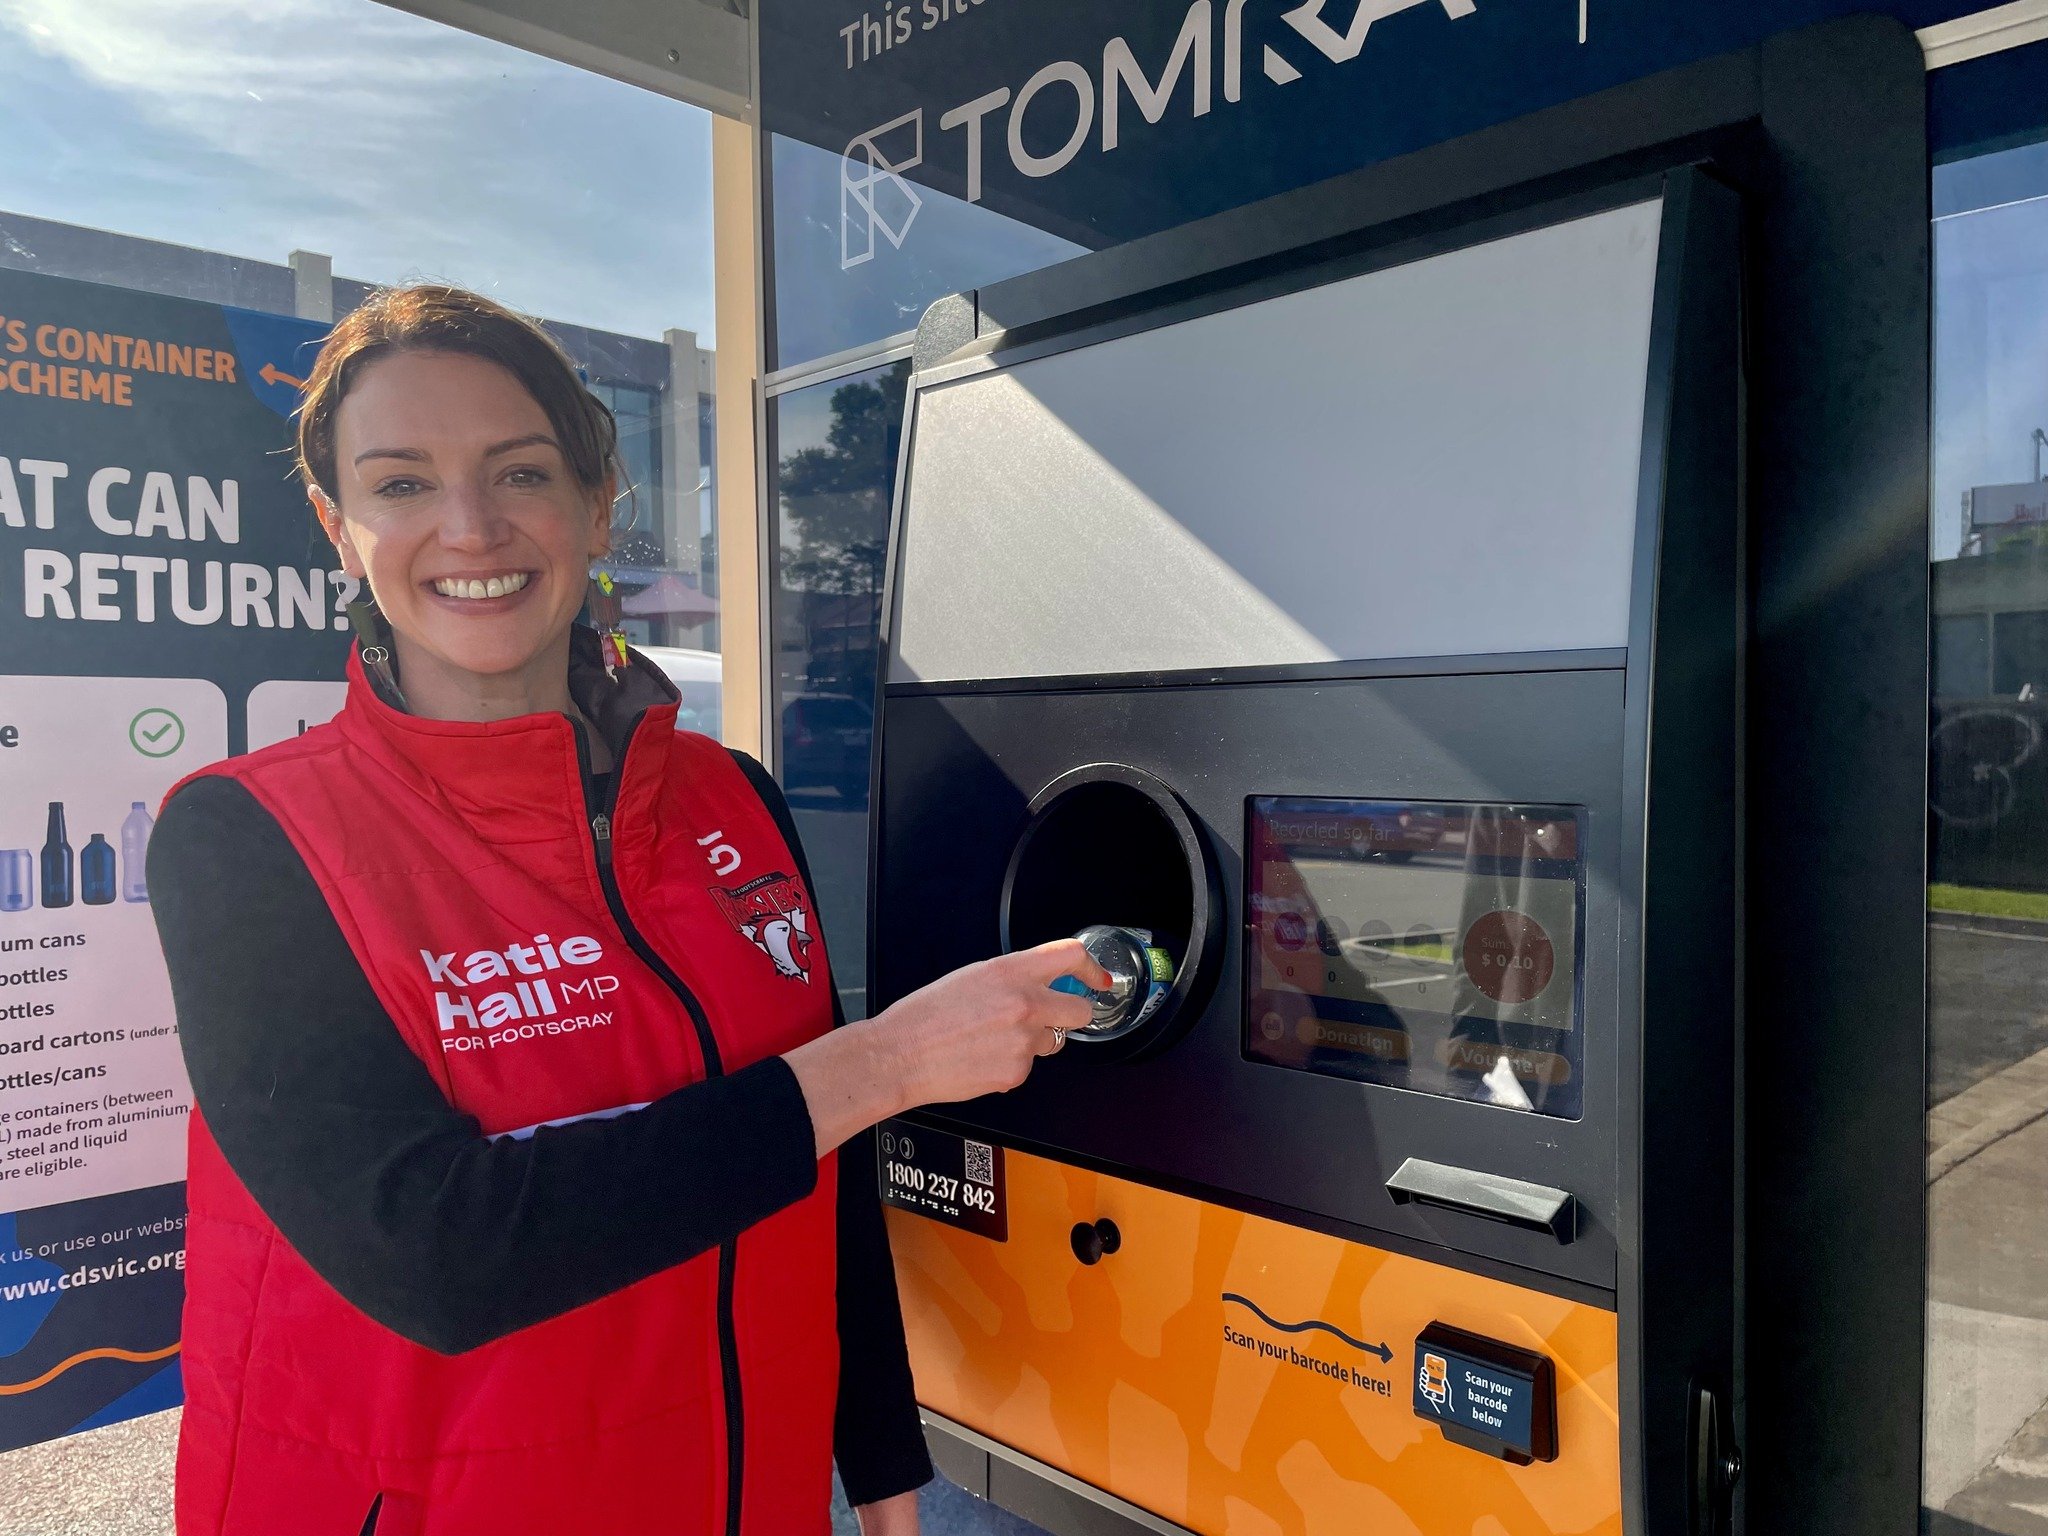 The Container Deposit Scheme is expanding in Footscray!
 
A brand new reverse vending machine has officially opened at 71-81 Whitehall Street in Footscray.
 
Bottles, cans, and containers&mdash;they're all accepted and all worth 10 cents a pop.
 
Put